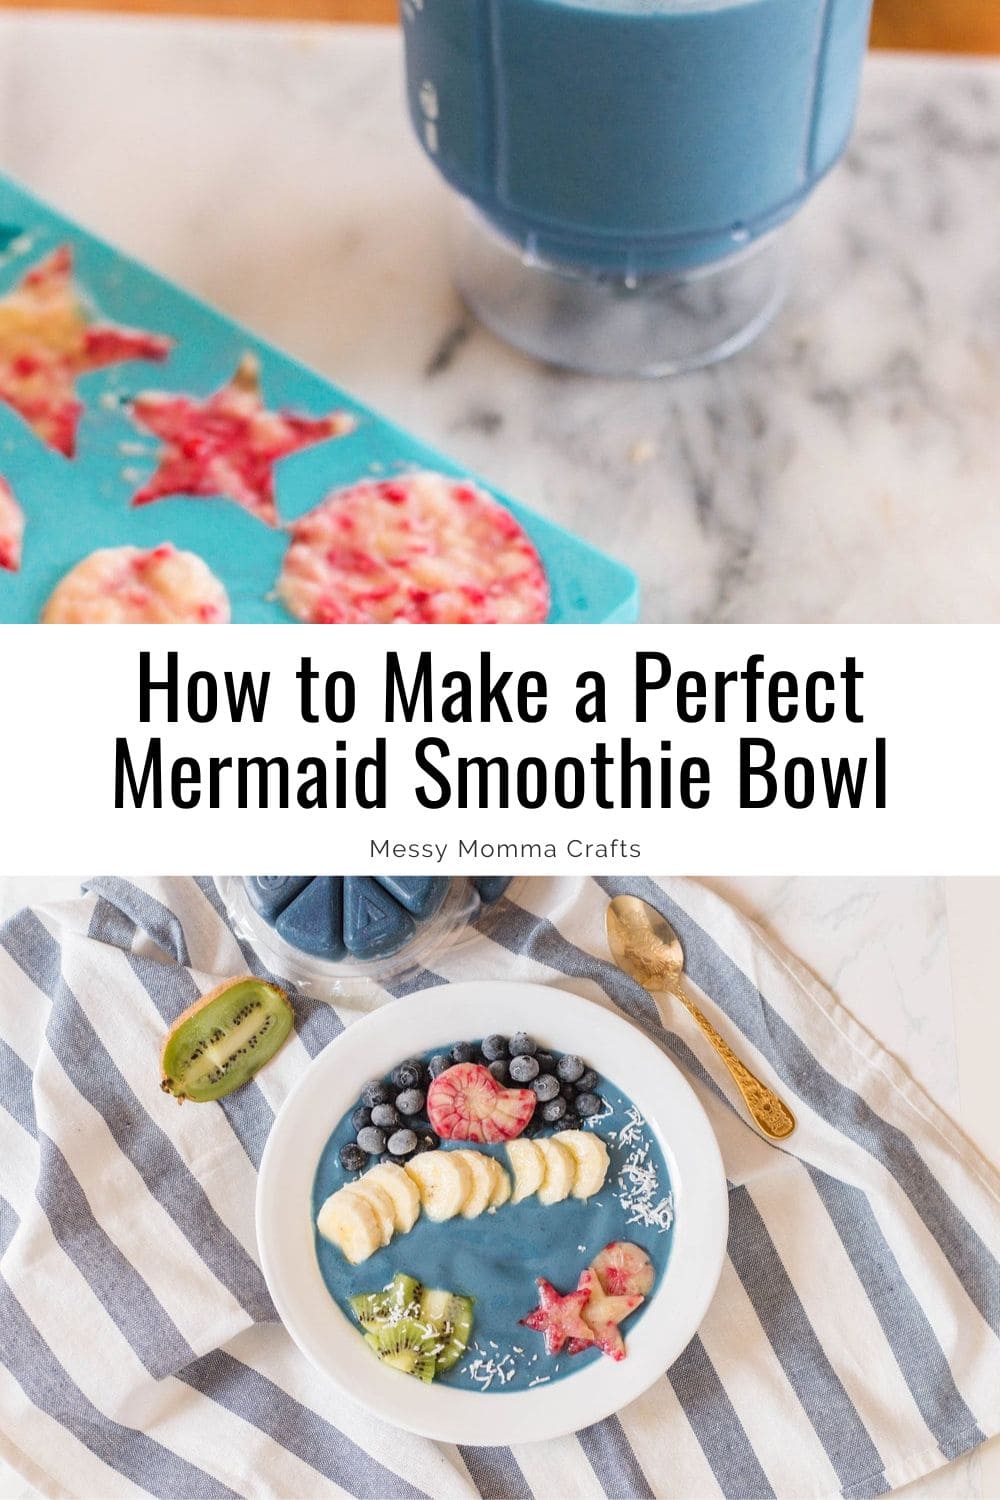 How to make a mermaid smoothie bowl.